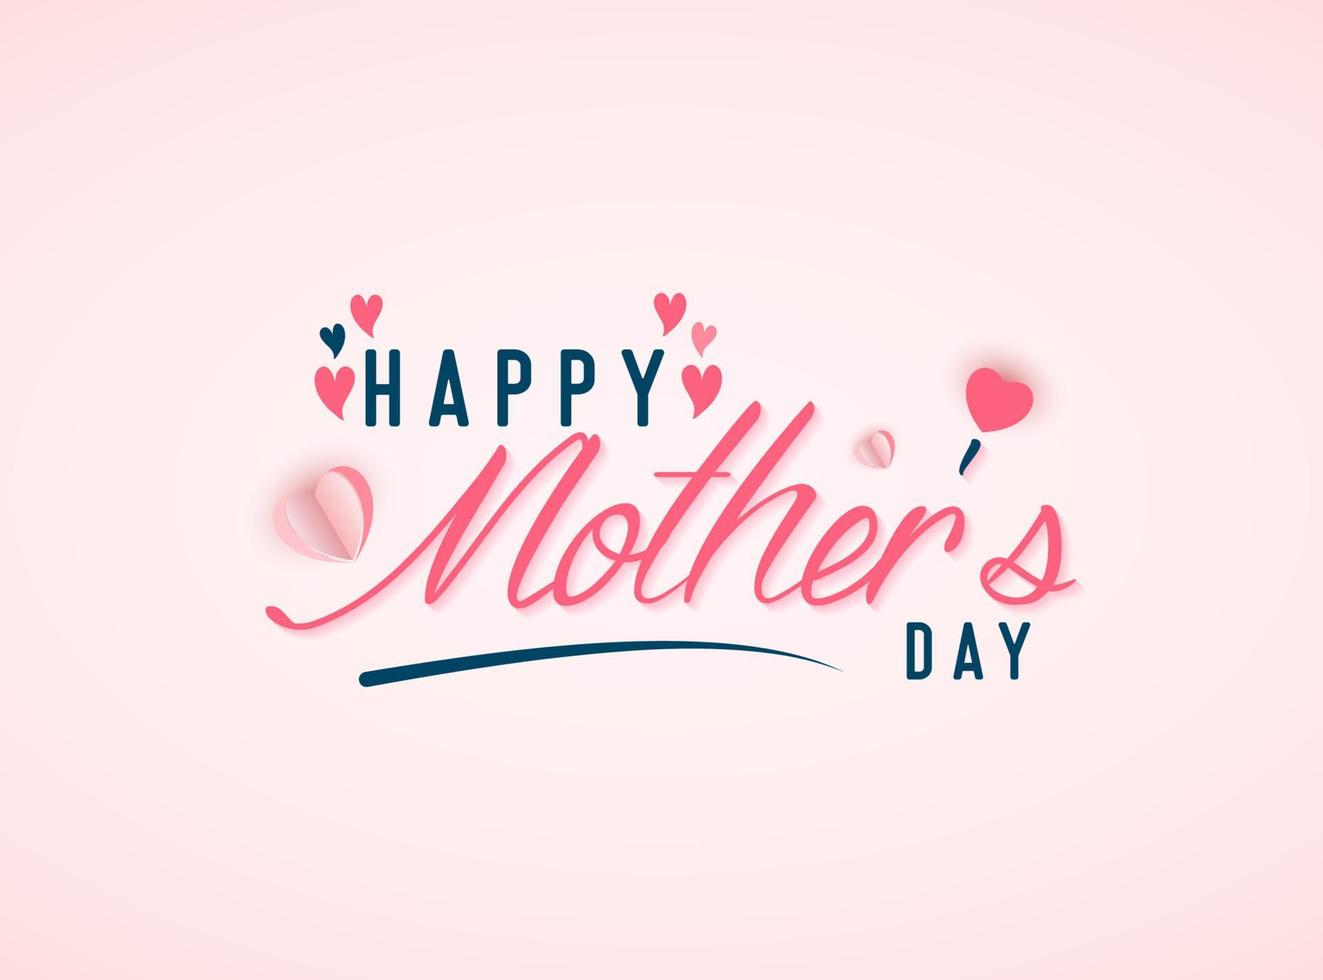 Happy mothers day lettering with pink paper heart shape vector